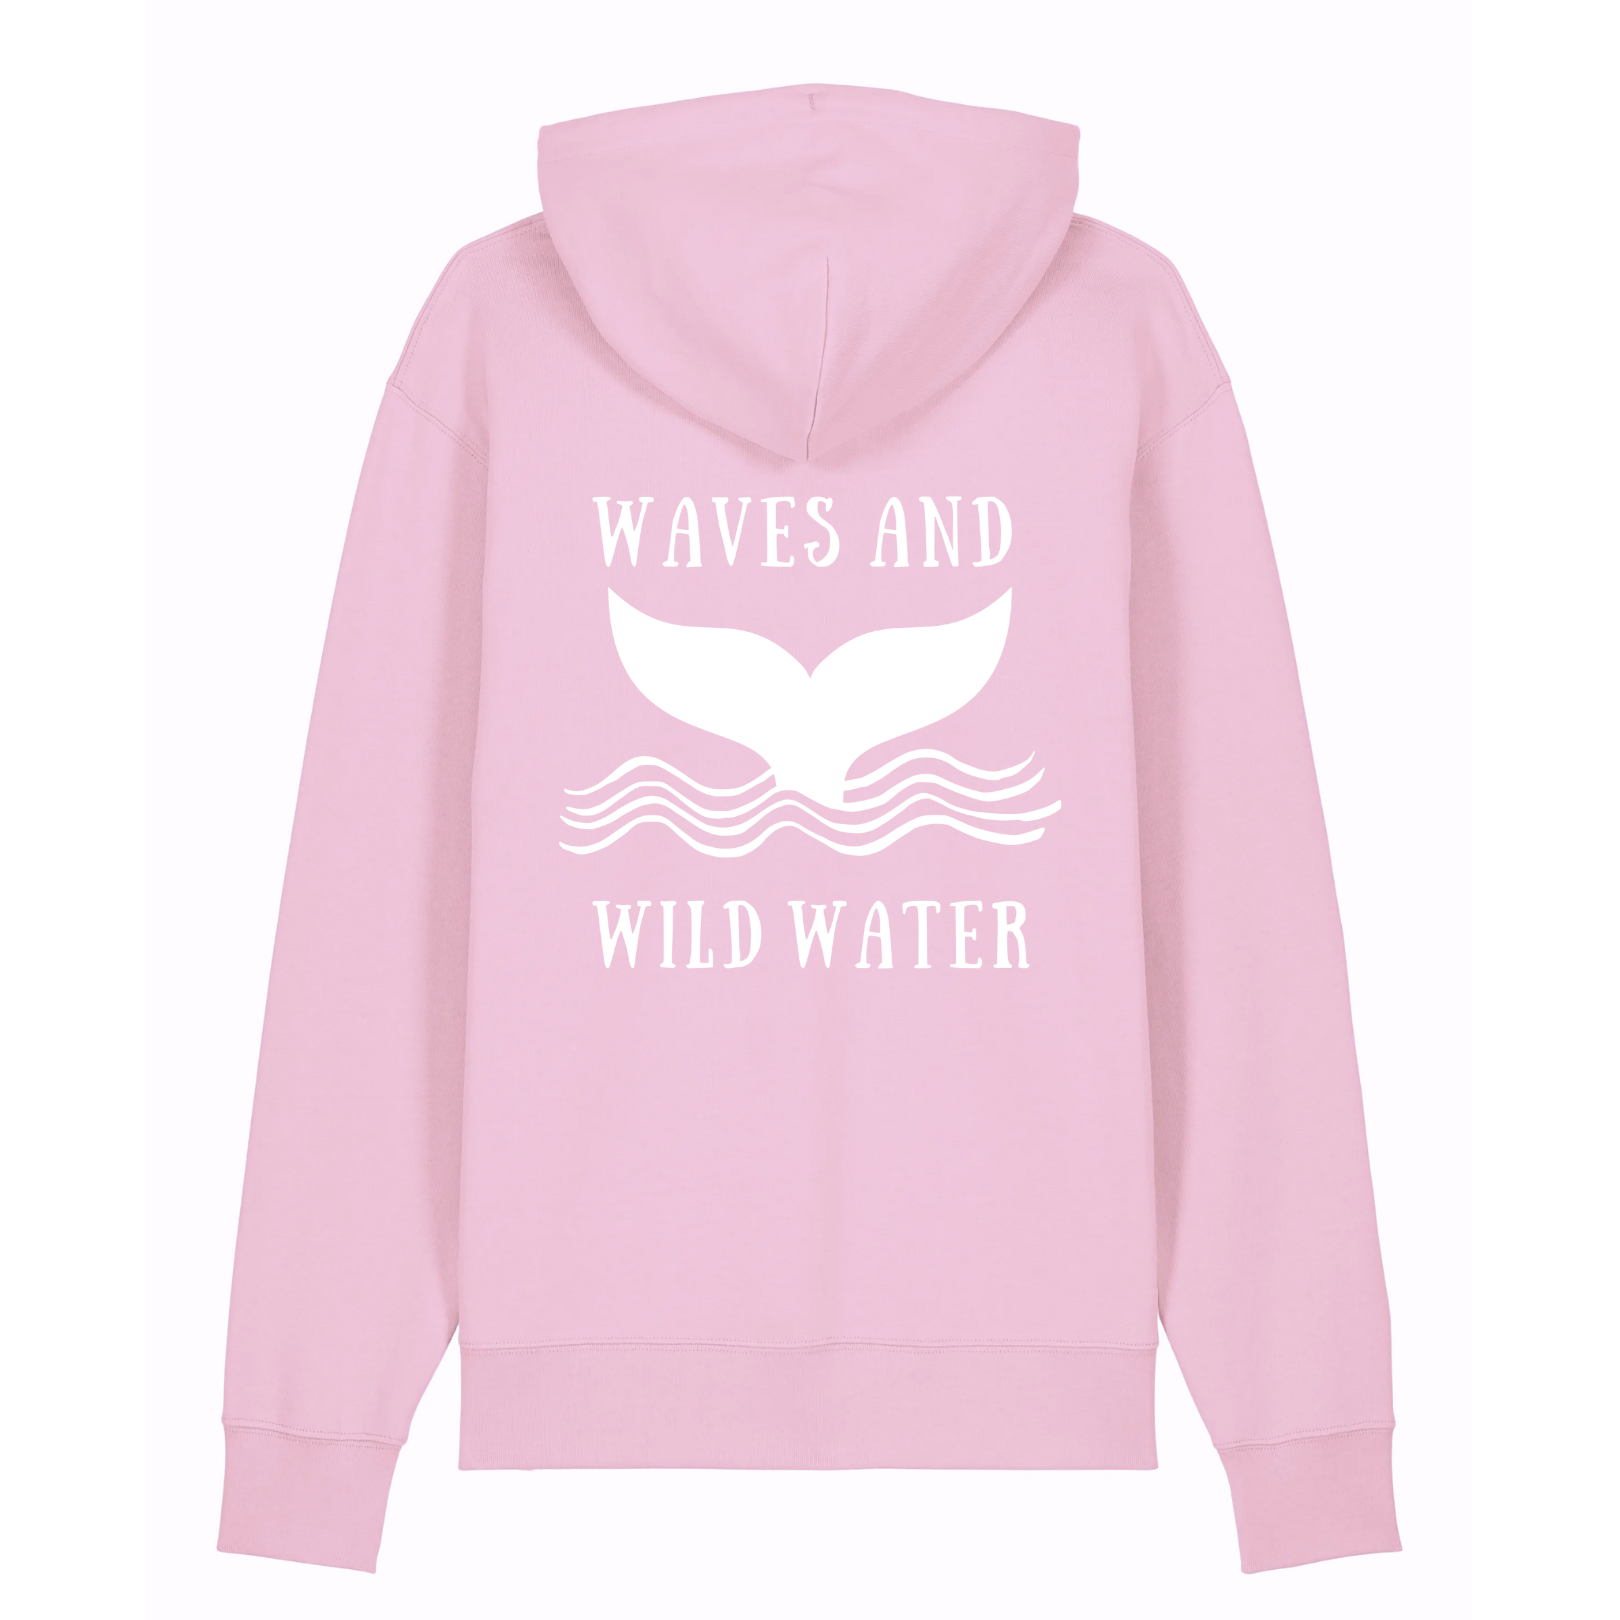 At Waves and Wild Water we all love this pink organic cotton and recycled polyester hoodie from our Beach Hut Hoodies collection. The image shows the back of the hoodie with a large Waves and Wild Water logo depicting a whale tail emerging from the waves hand printed in white vegan ink. We think it is perfect if you love water adventures too.